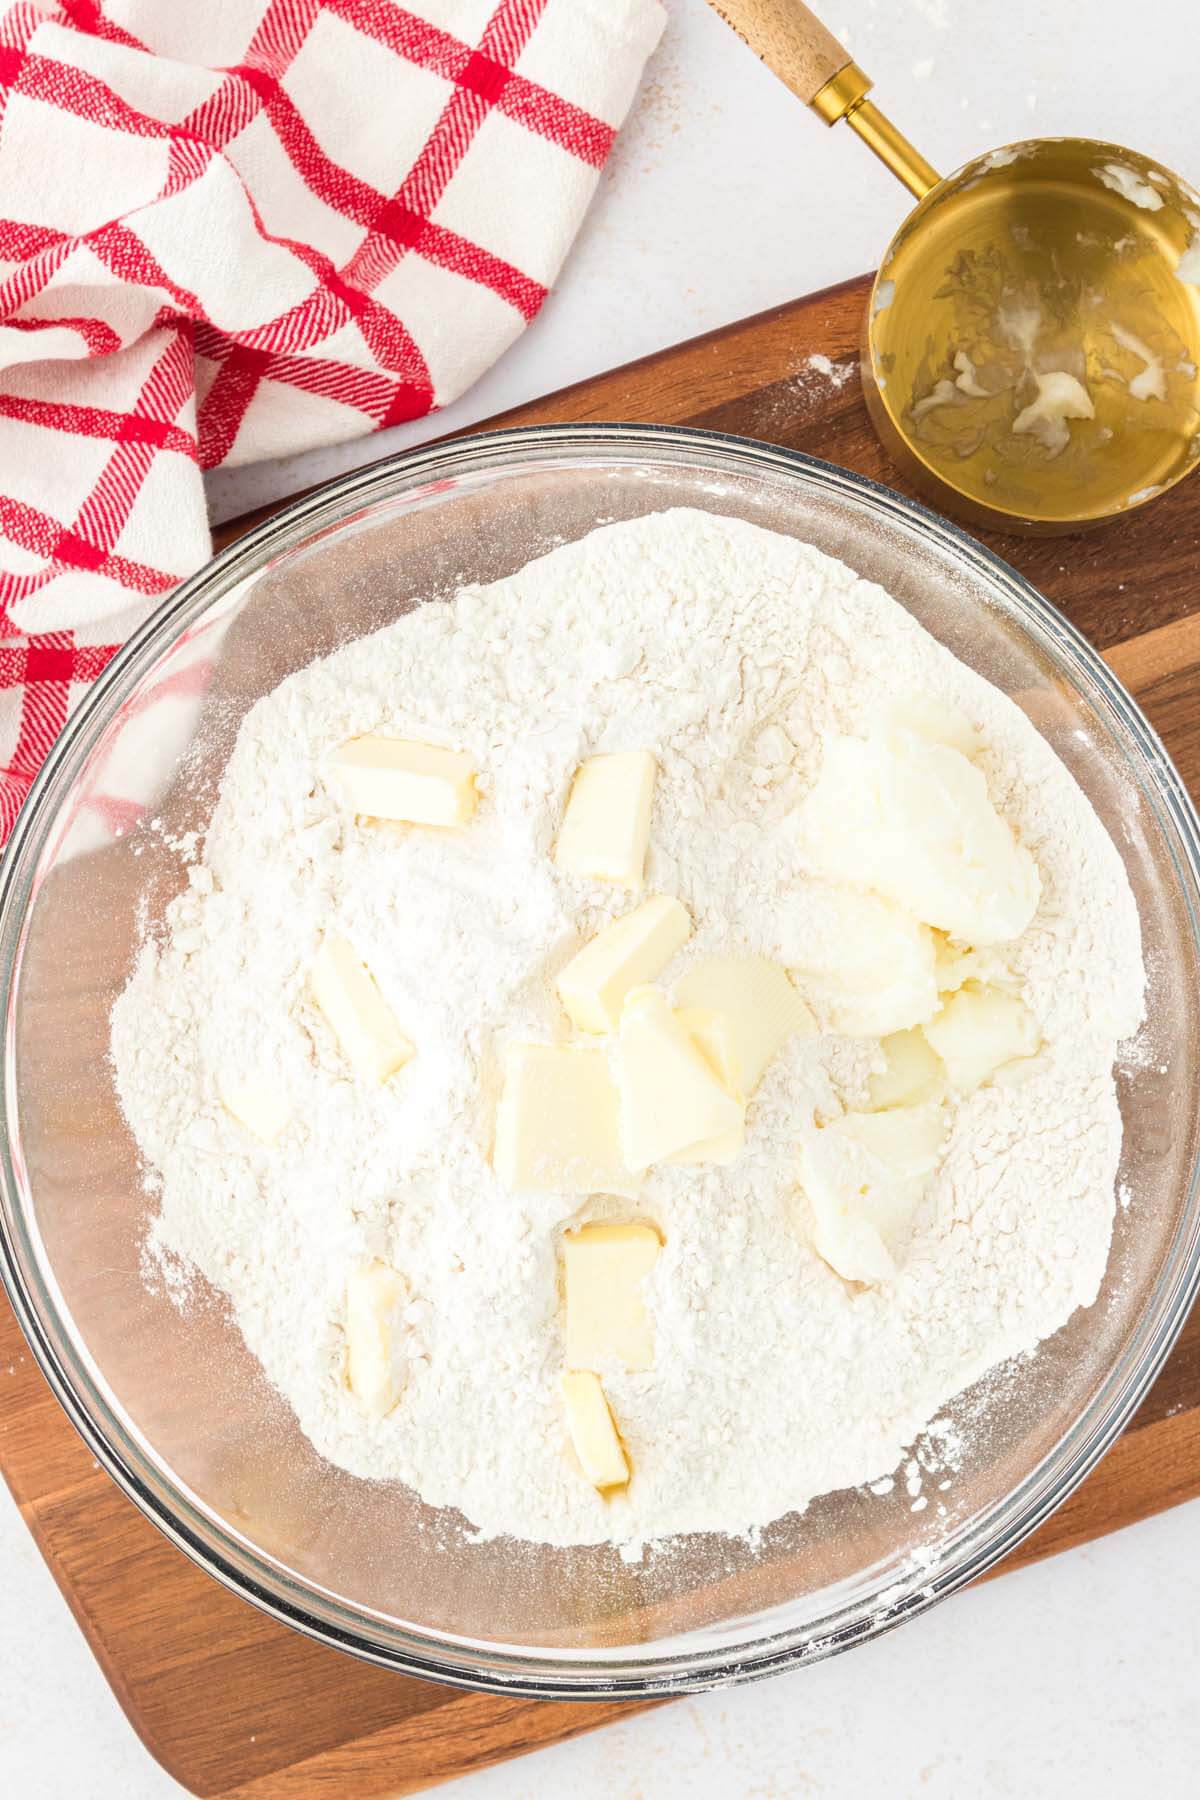 Butter chunks in a bowl of flour.